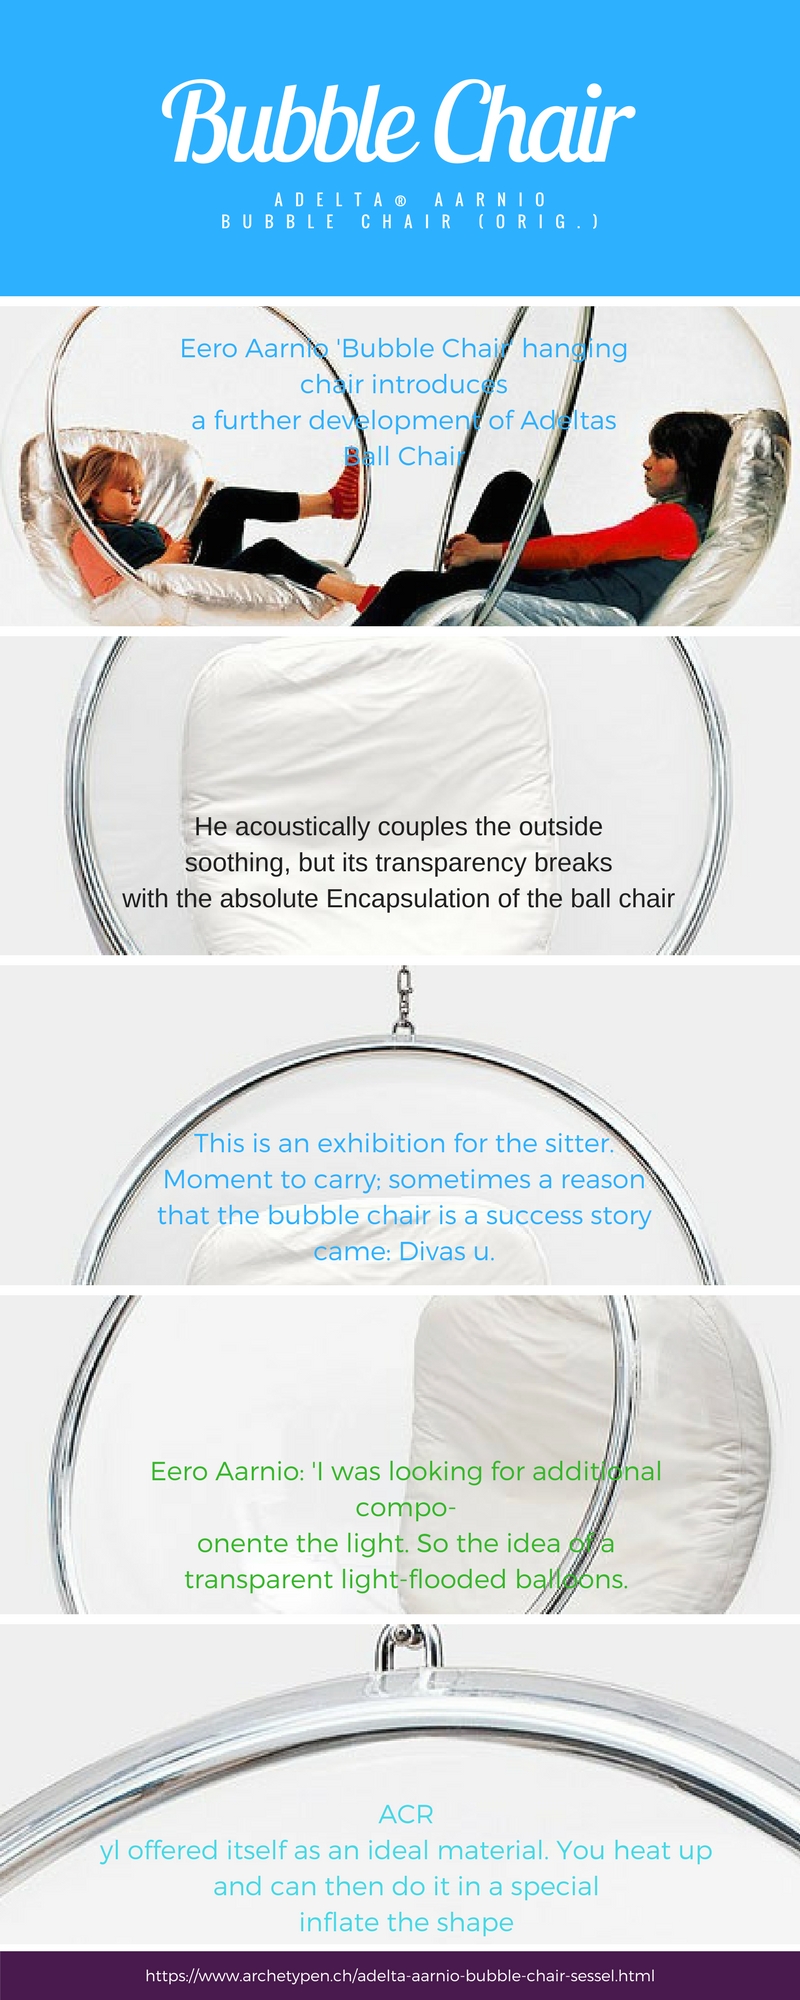 Bubble chair for sale.jpg The contemporary-styled hanging Eero Aarnio’s Bubble Chair is great for indoor as well as outdoor use. Your experience of space will never be the same as you let brilliant reality shine in all directions.  by archetypen